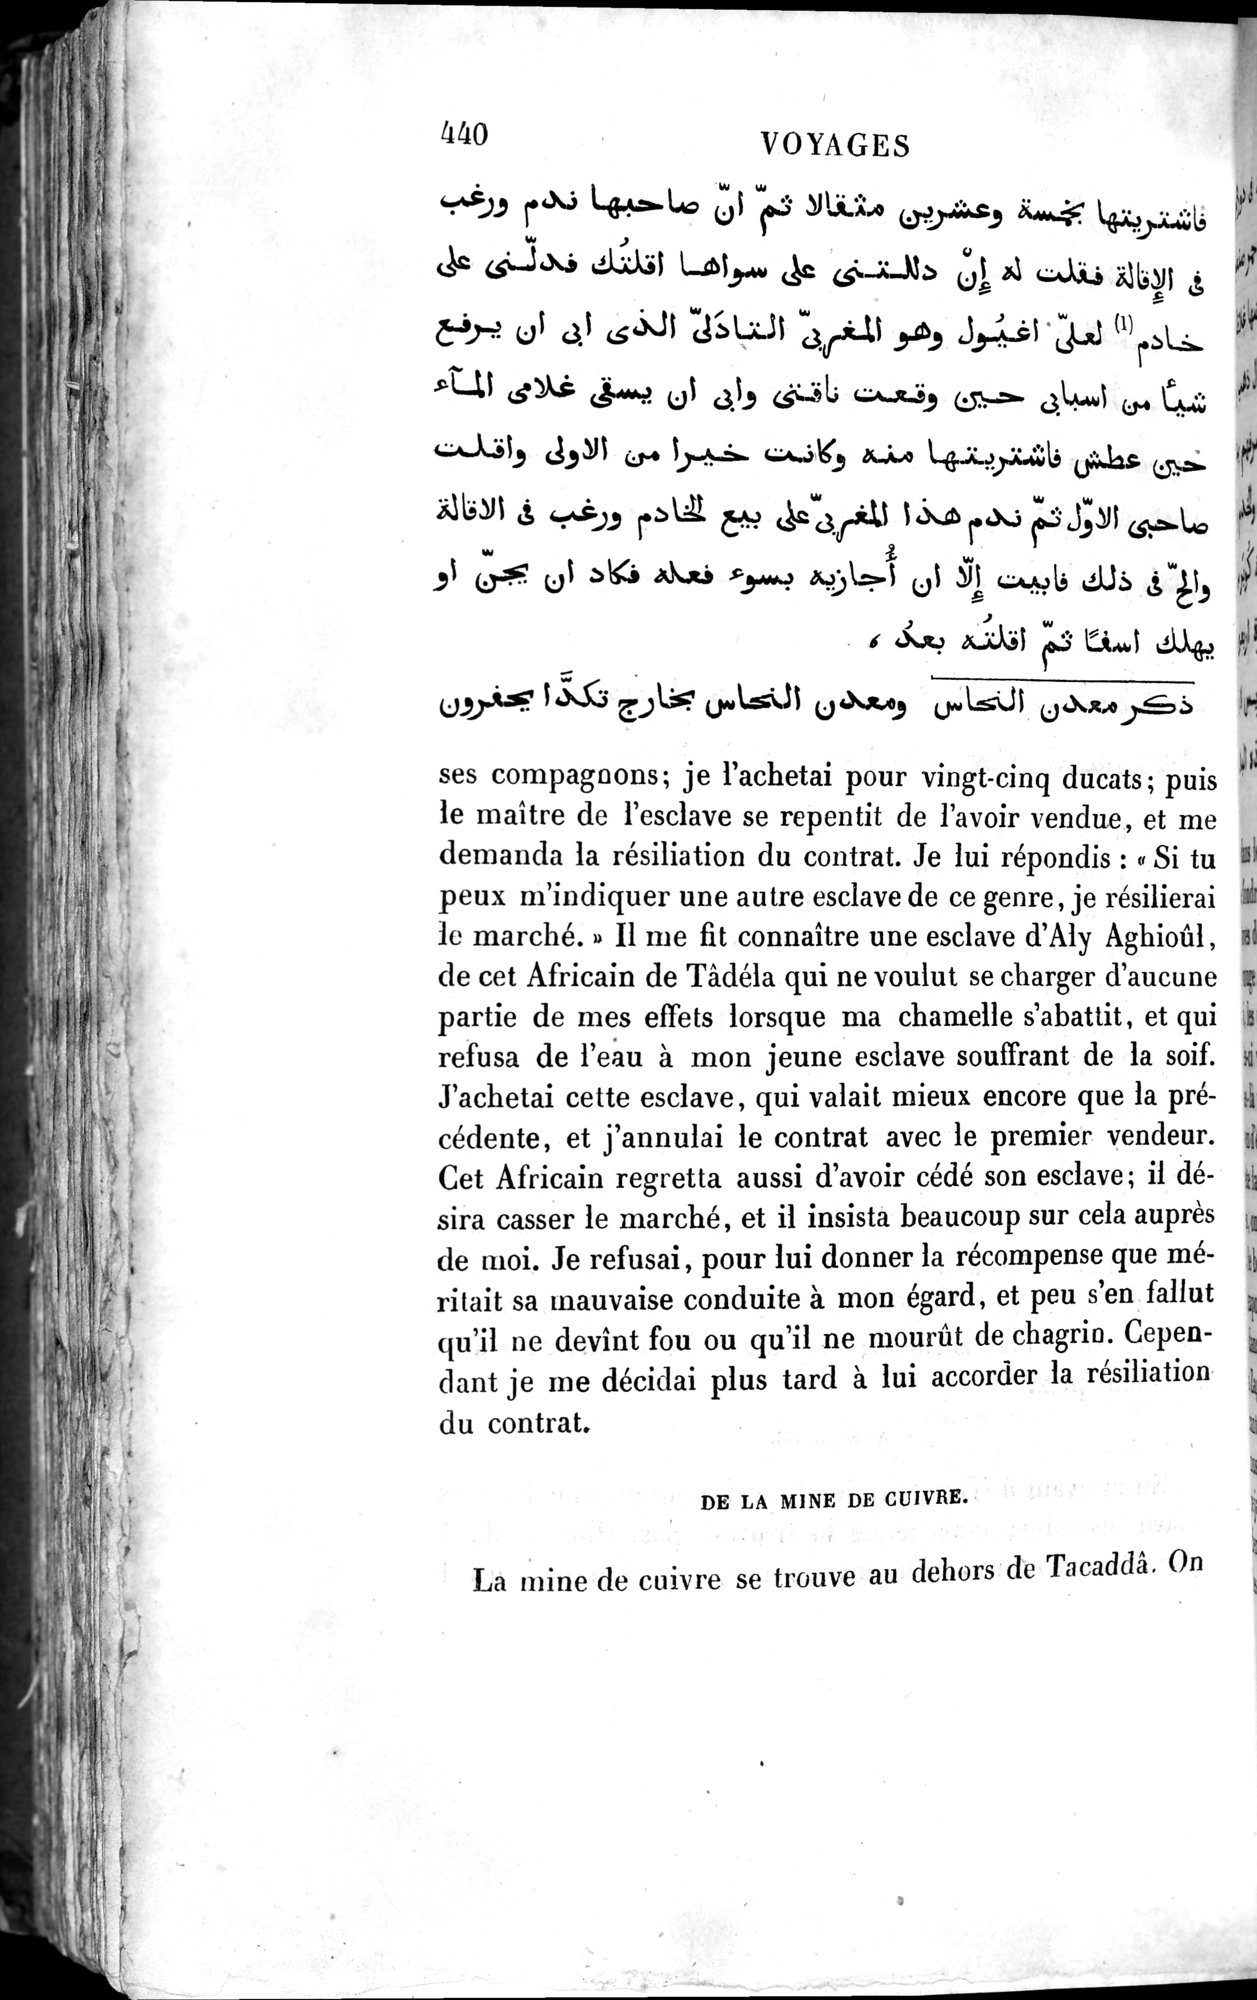 Voyages d'Ibn Batoutah : vol.4 / Page 452 (Grayscale High Resolution Image)